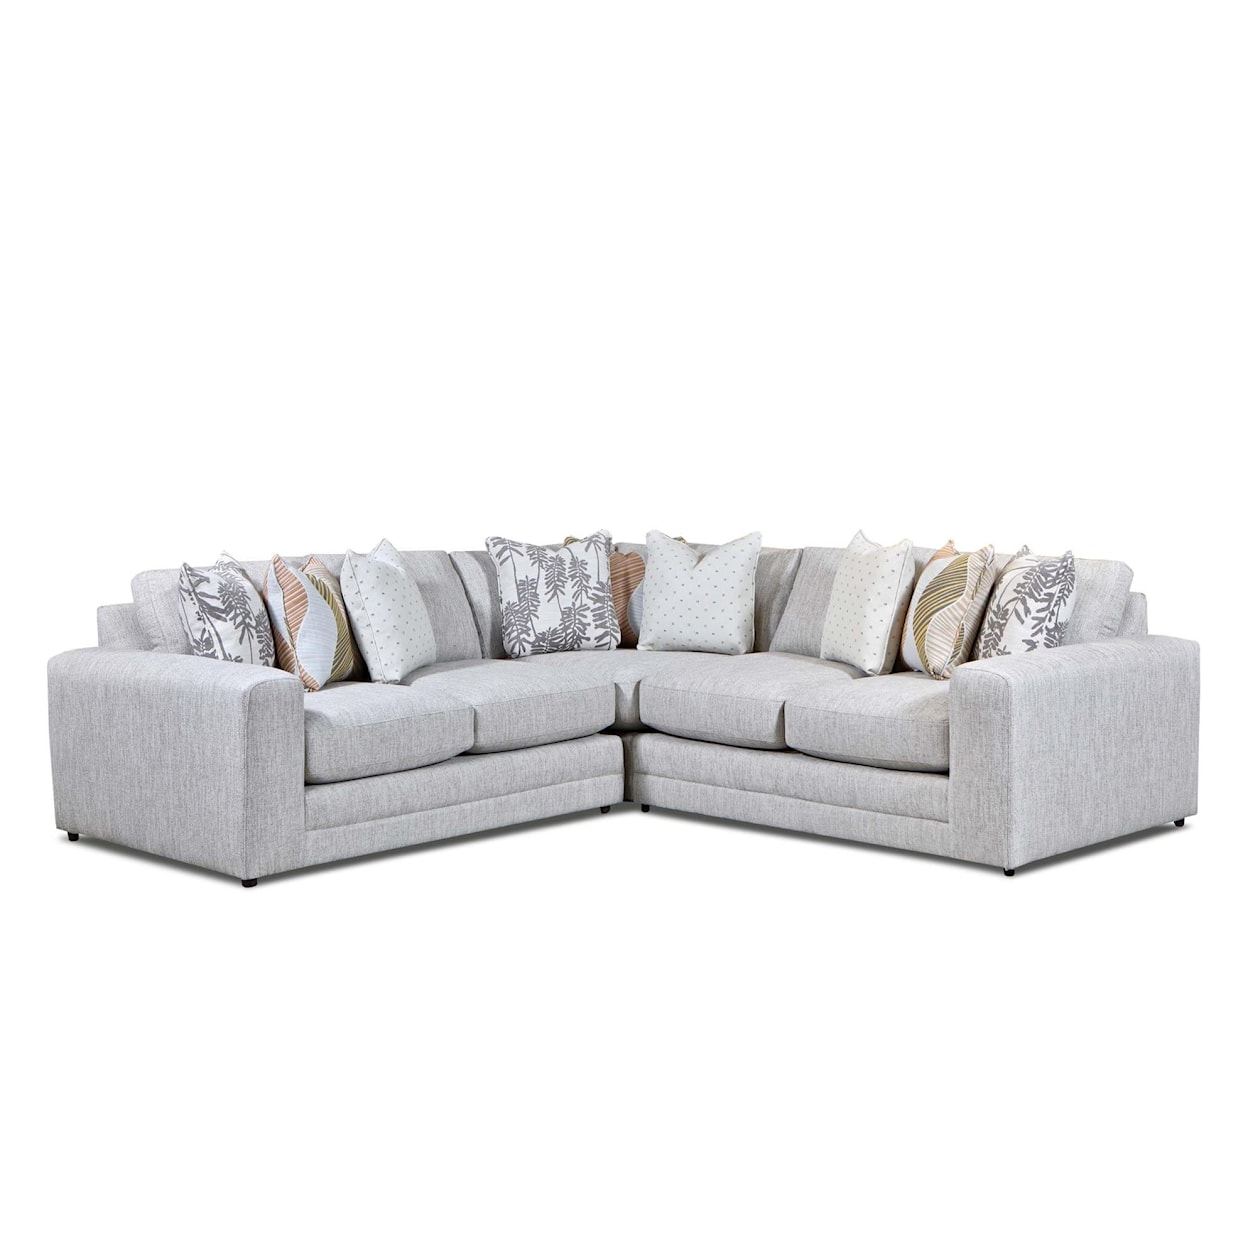 Fusion Furniture 7003 LOXLEY COCONUT Sectional